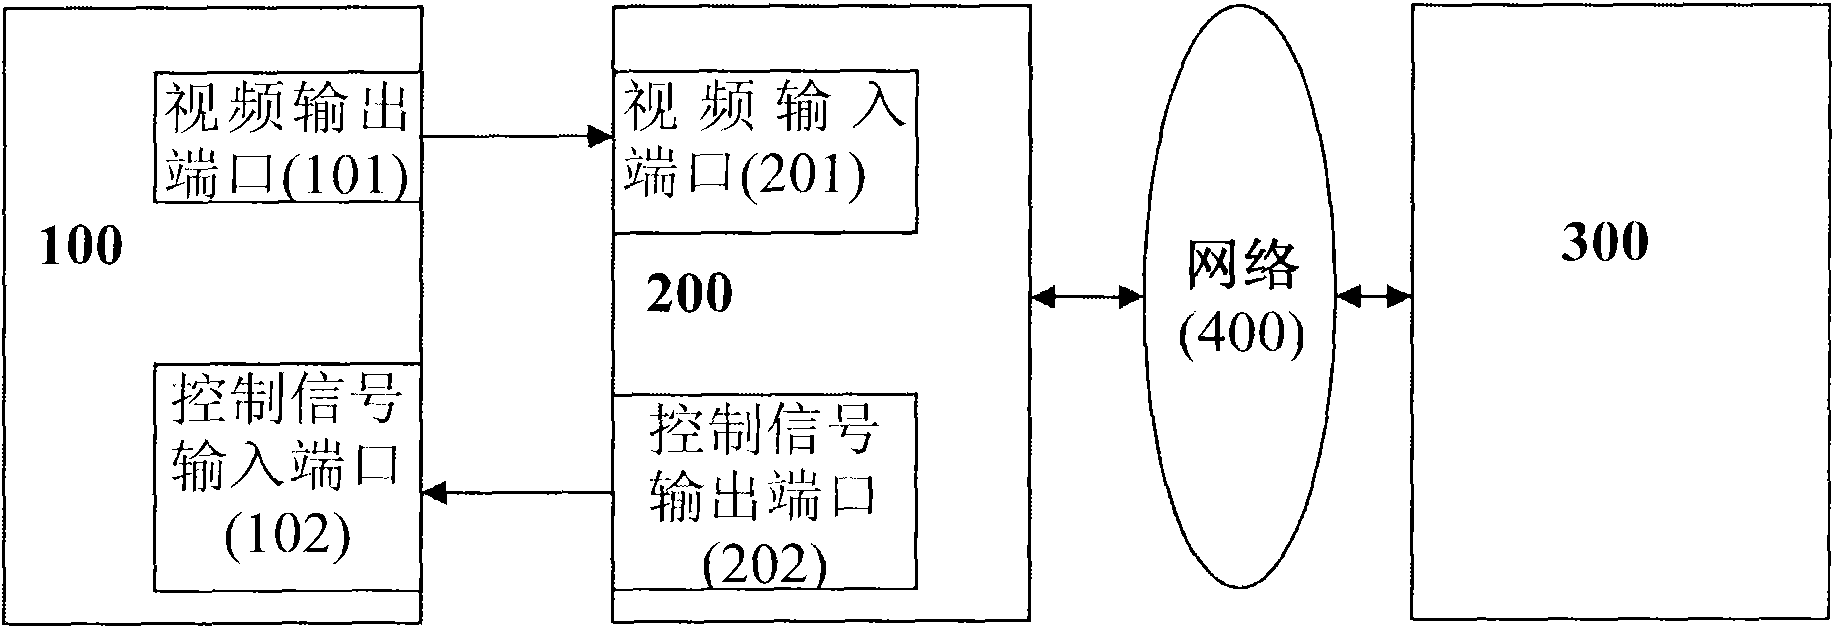 Remote desktop monitor and control system and method